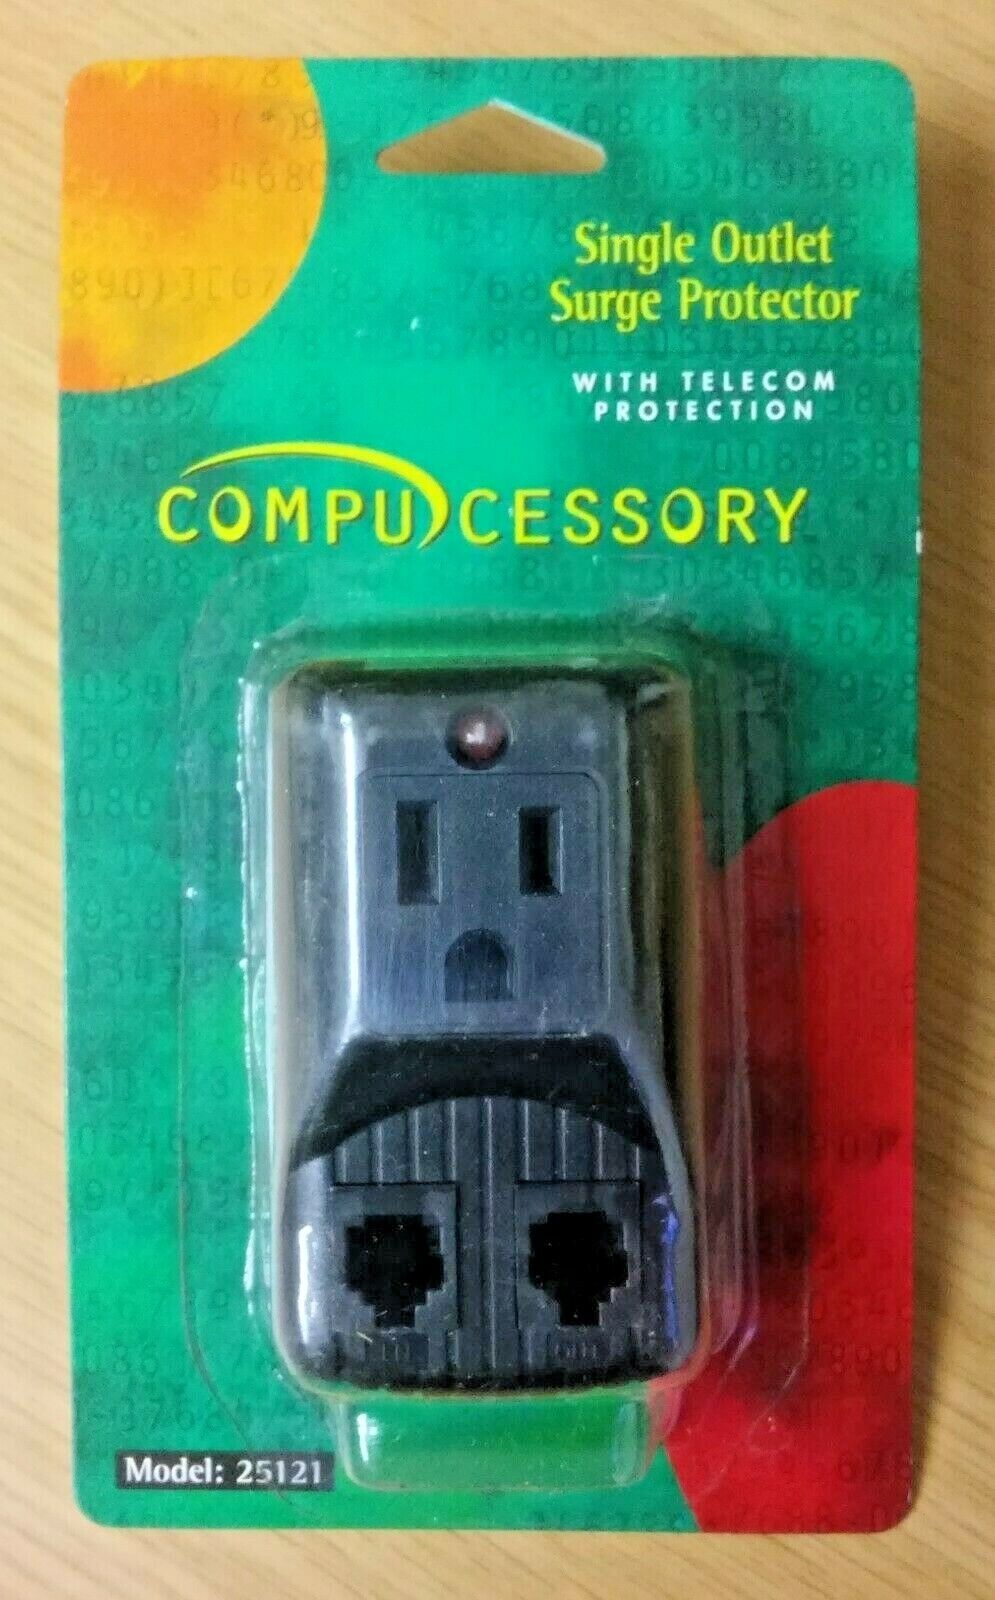 Compucessory Single Outlet Surge Protector - Brand New